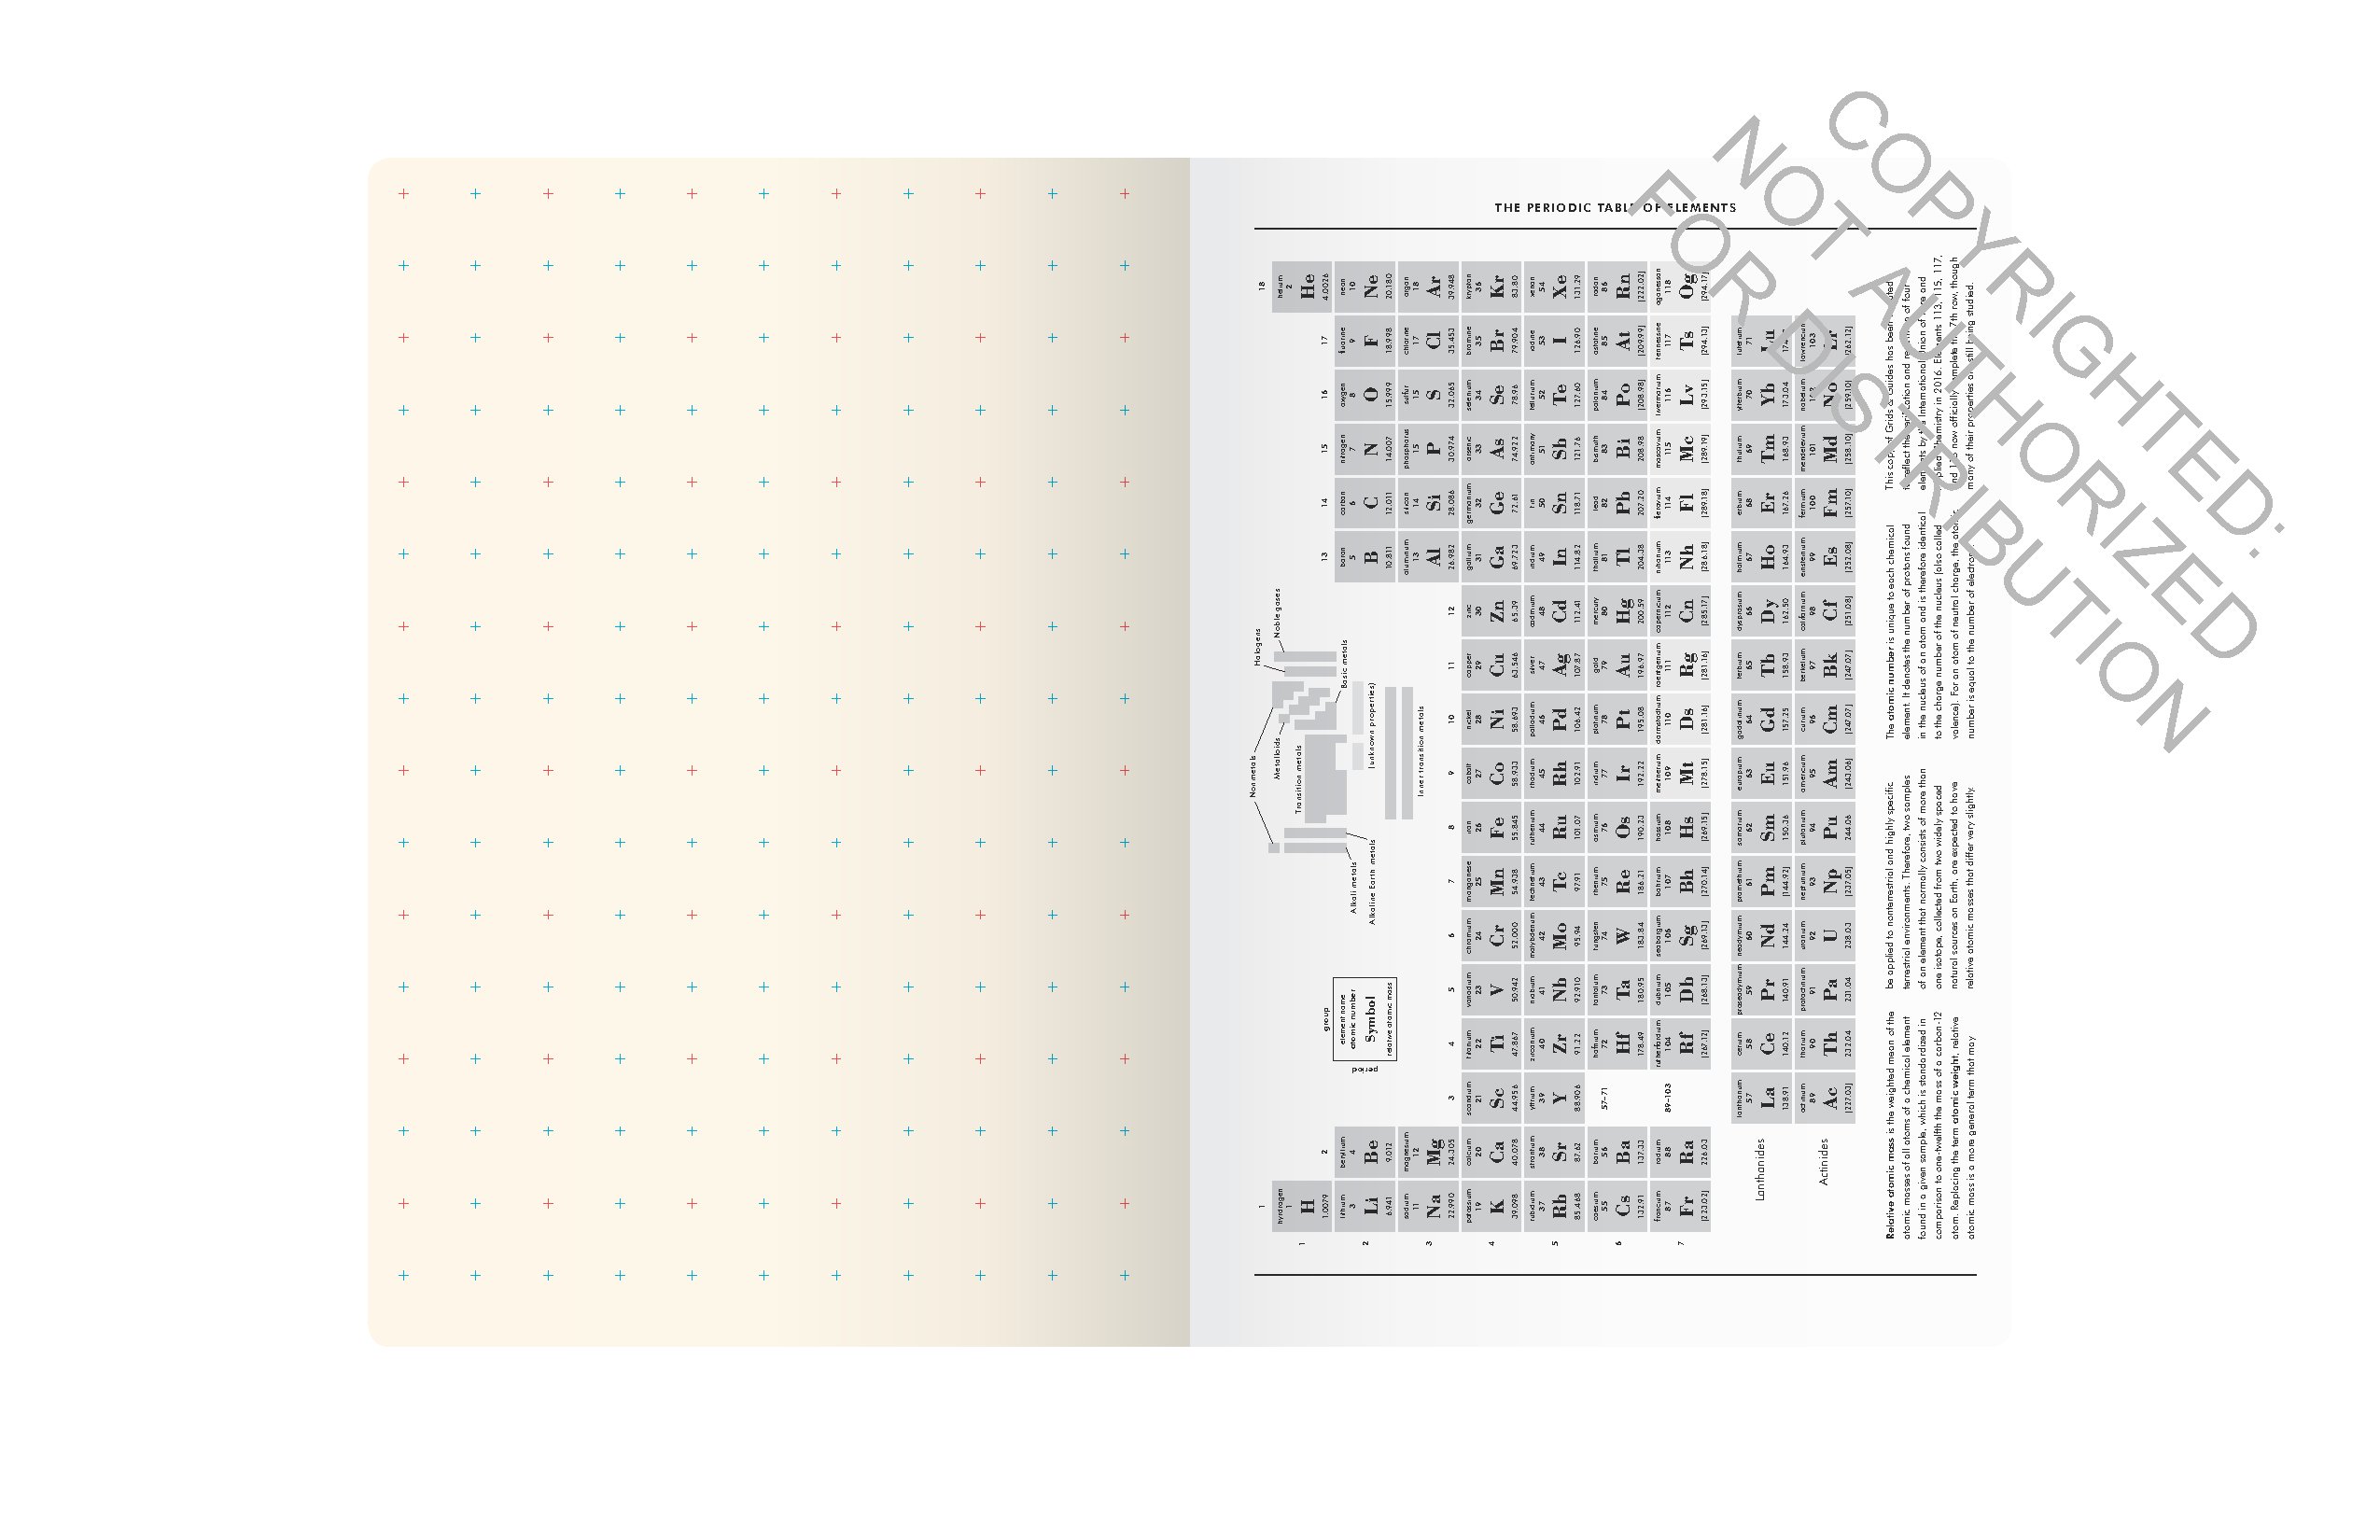 Grids & Guides Softcover (Black)